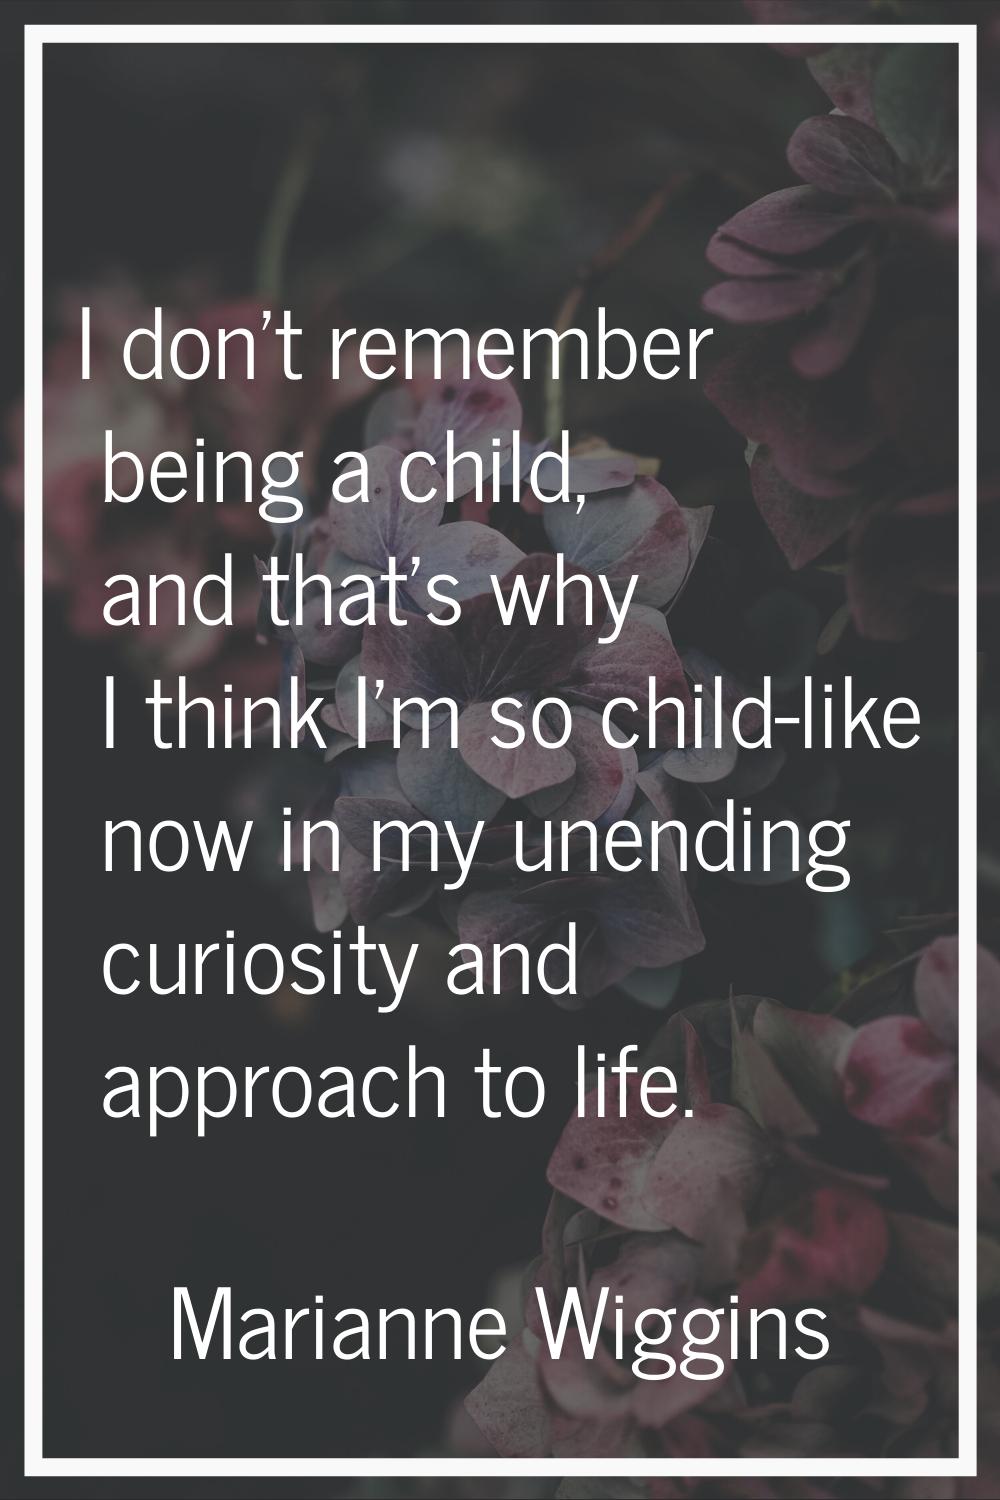 I don't remember being a child, and that's why I think I'm so child-like now in my unending curiosi